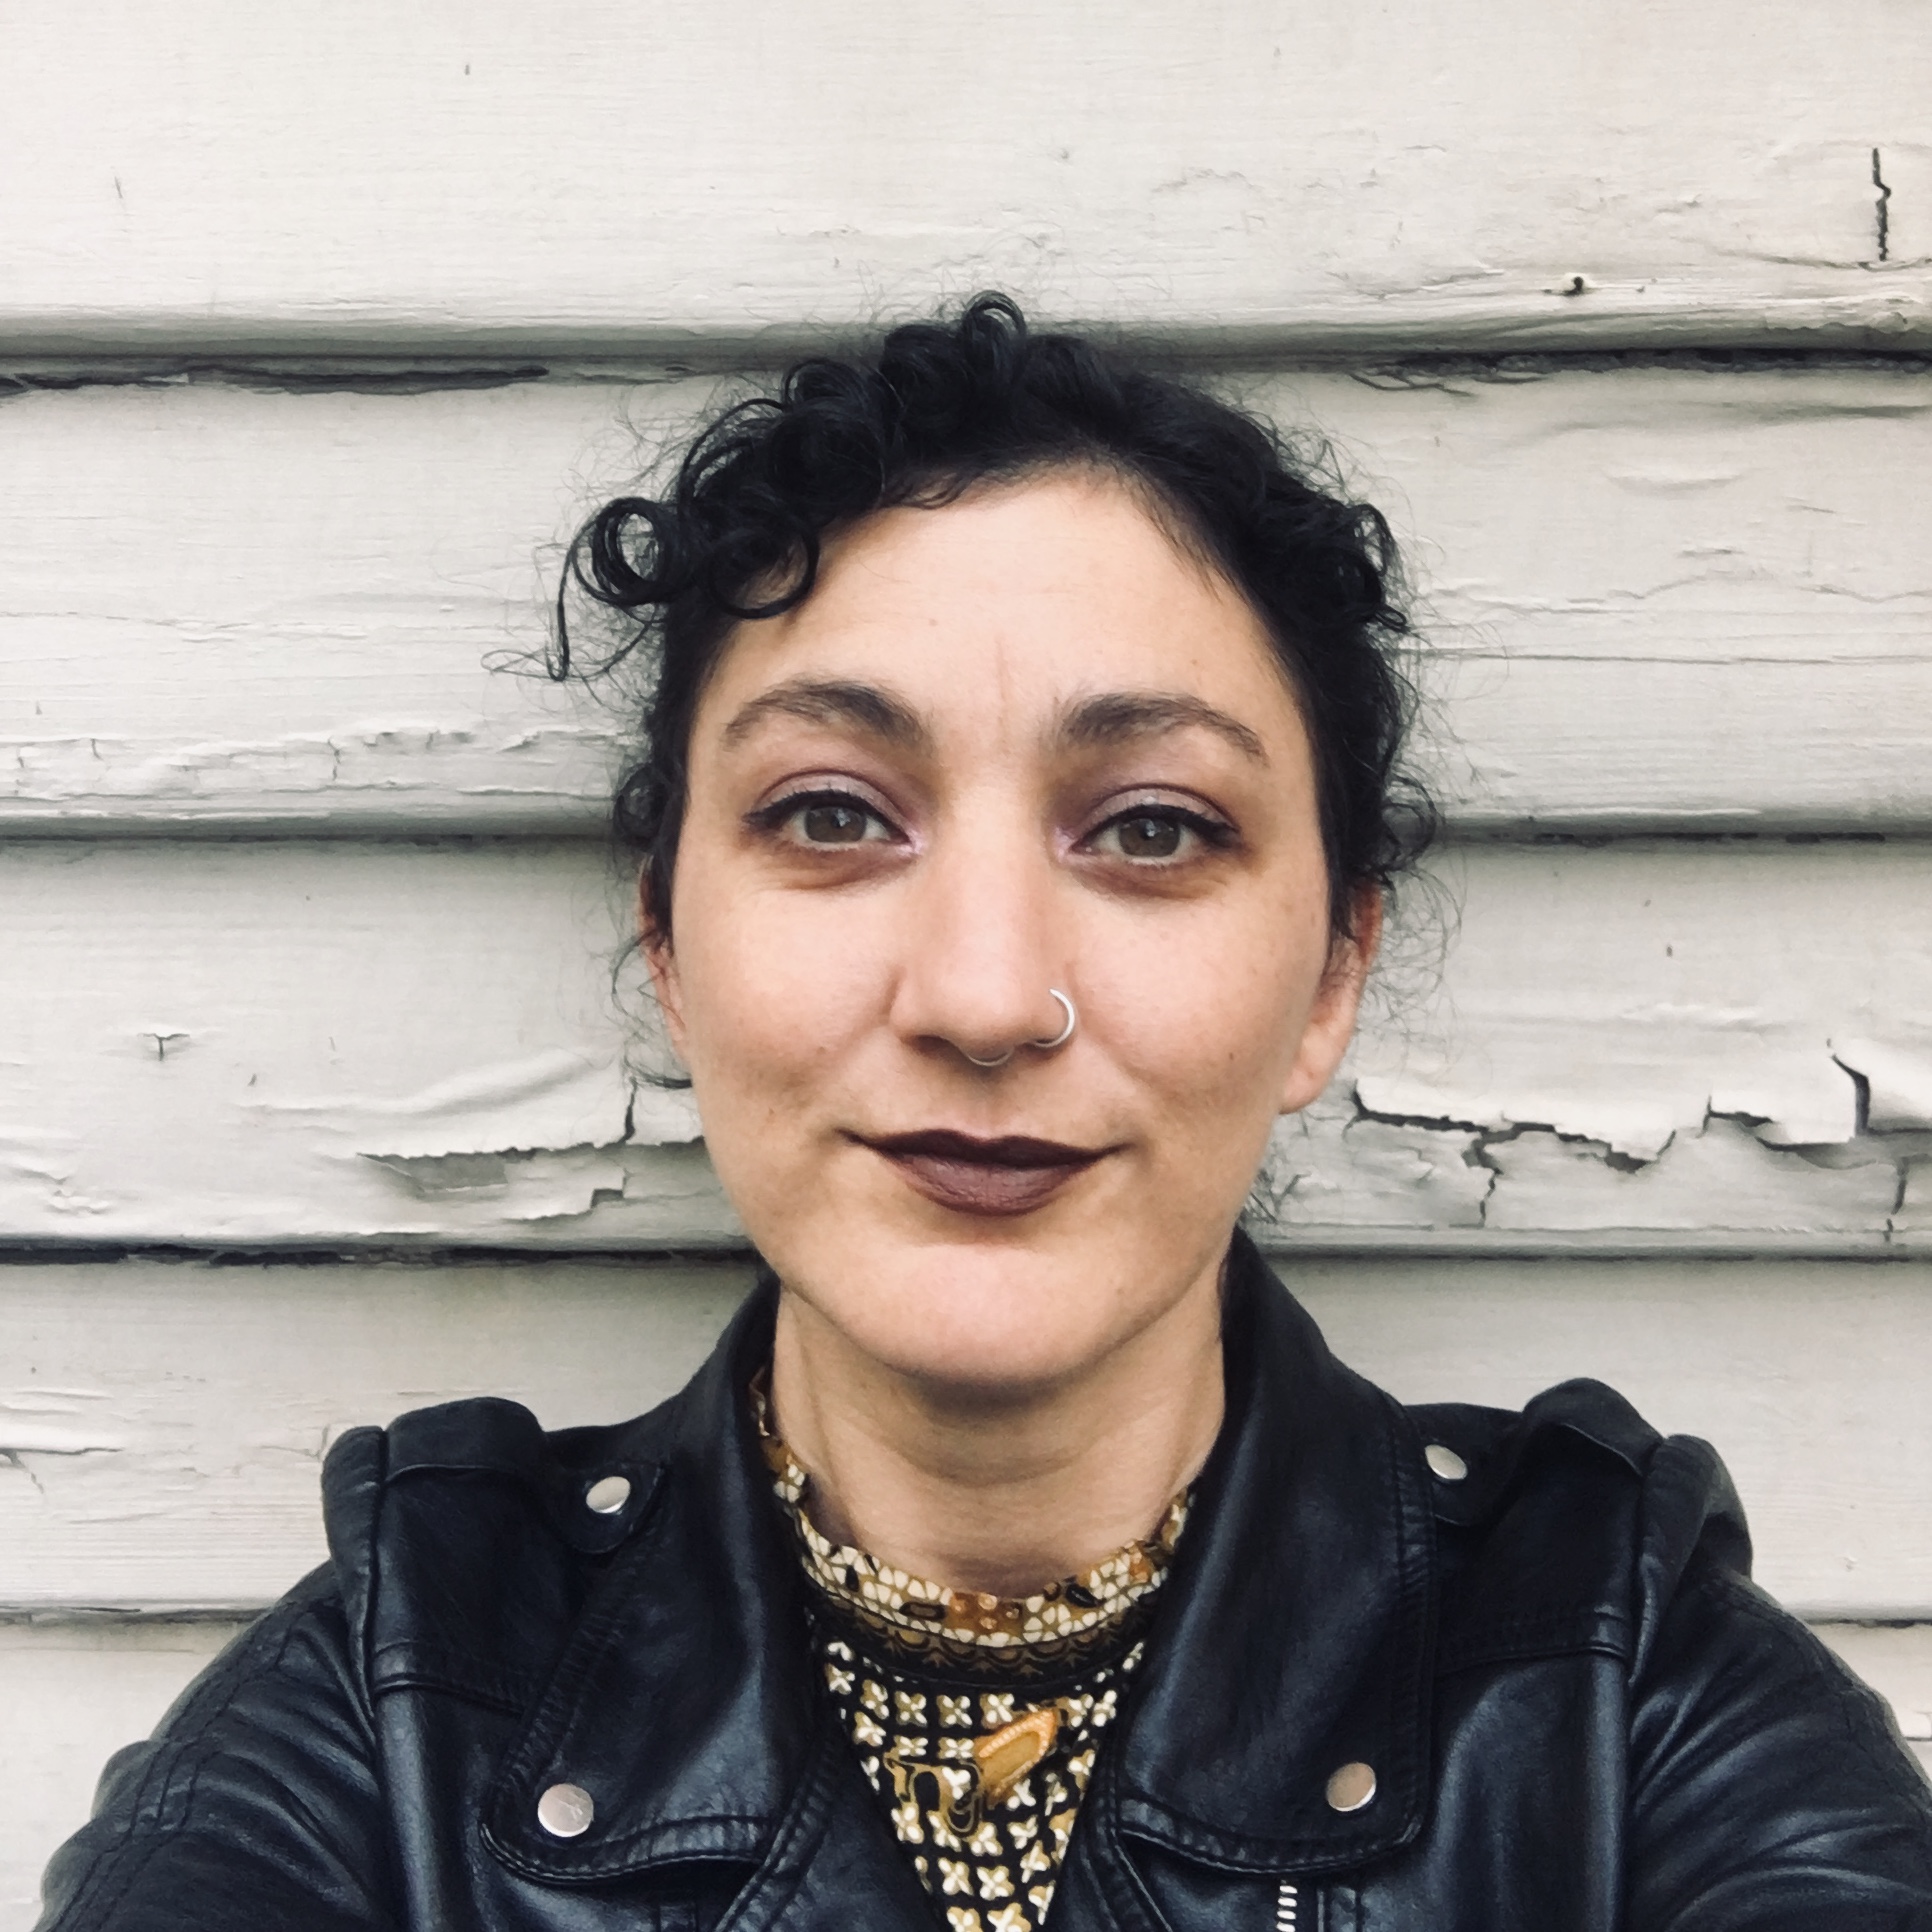 Mykaela Saunders takes a selfie in front of a white wall with peeling paint. She wears a black leather jacket and dark lipstick.